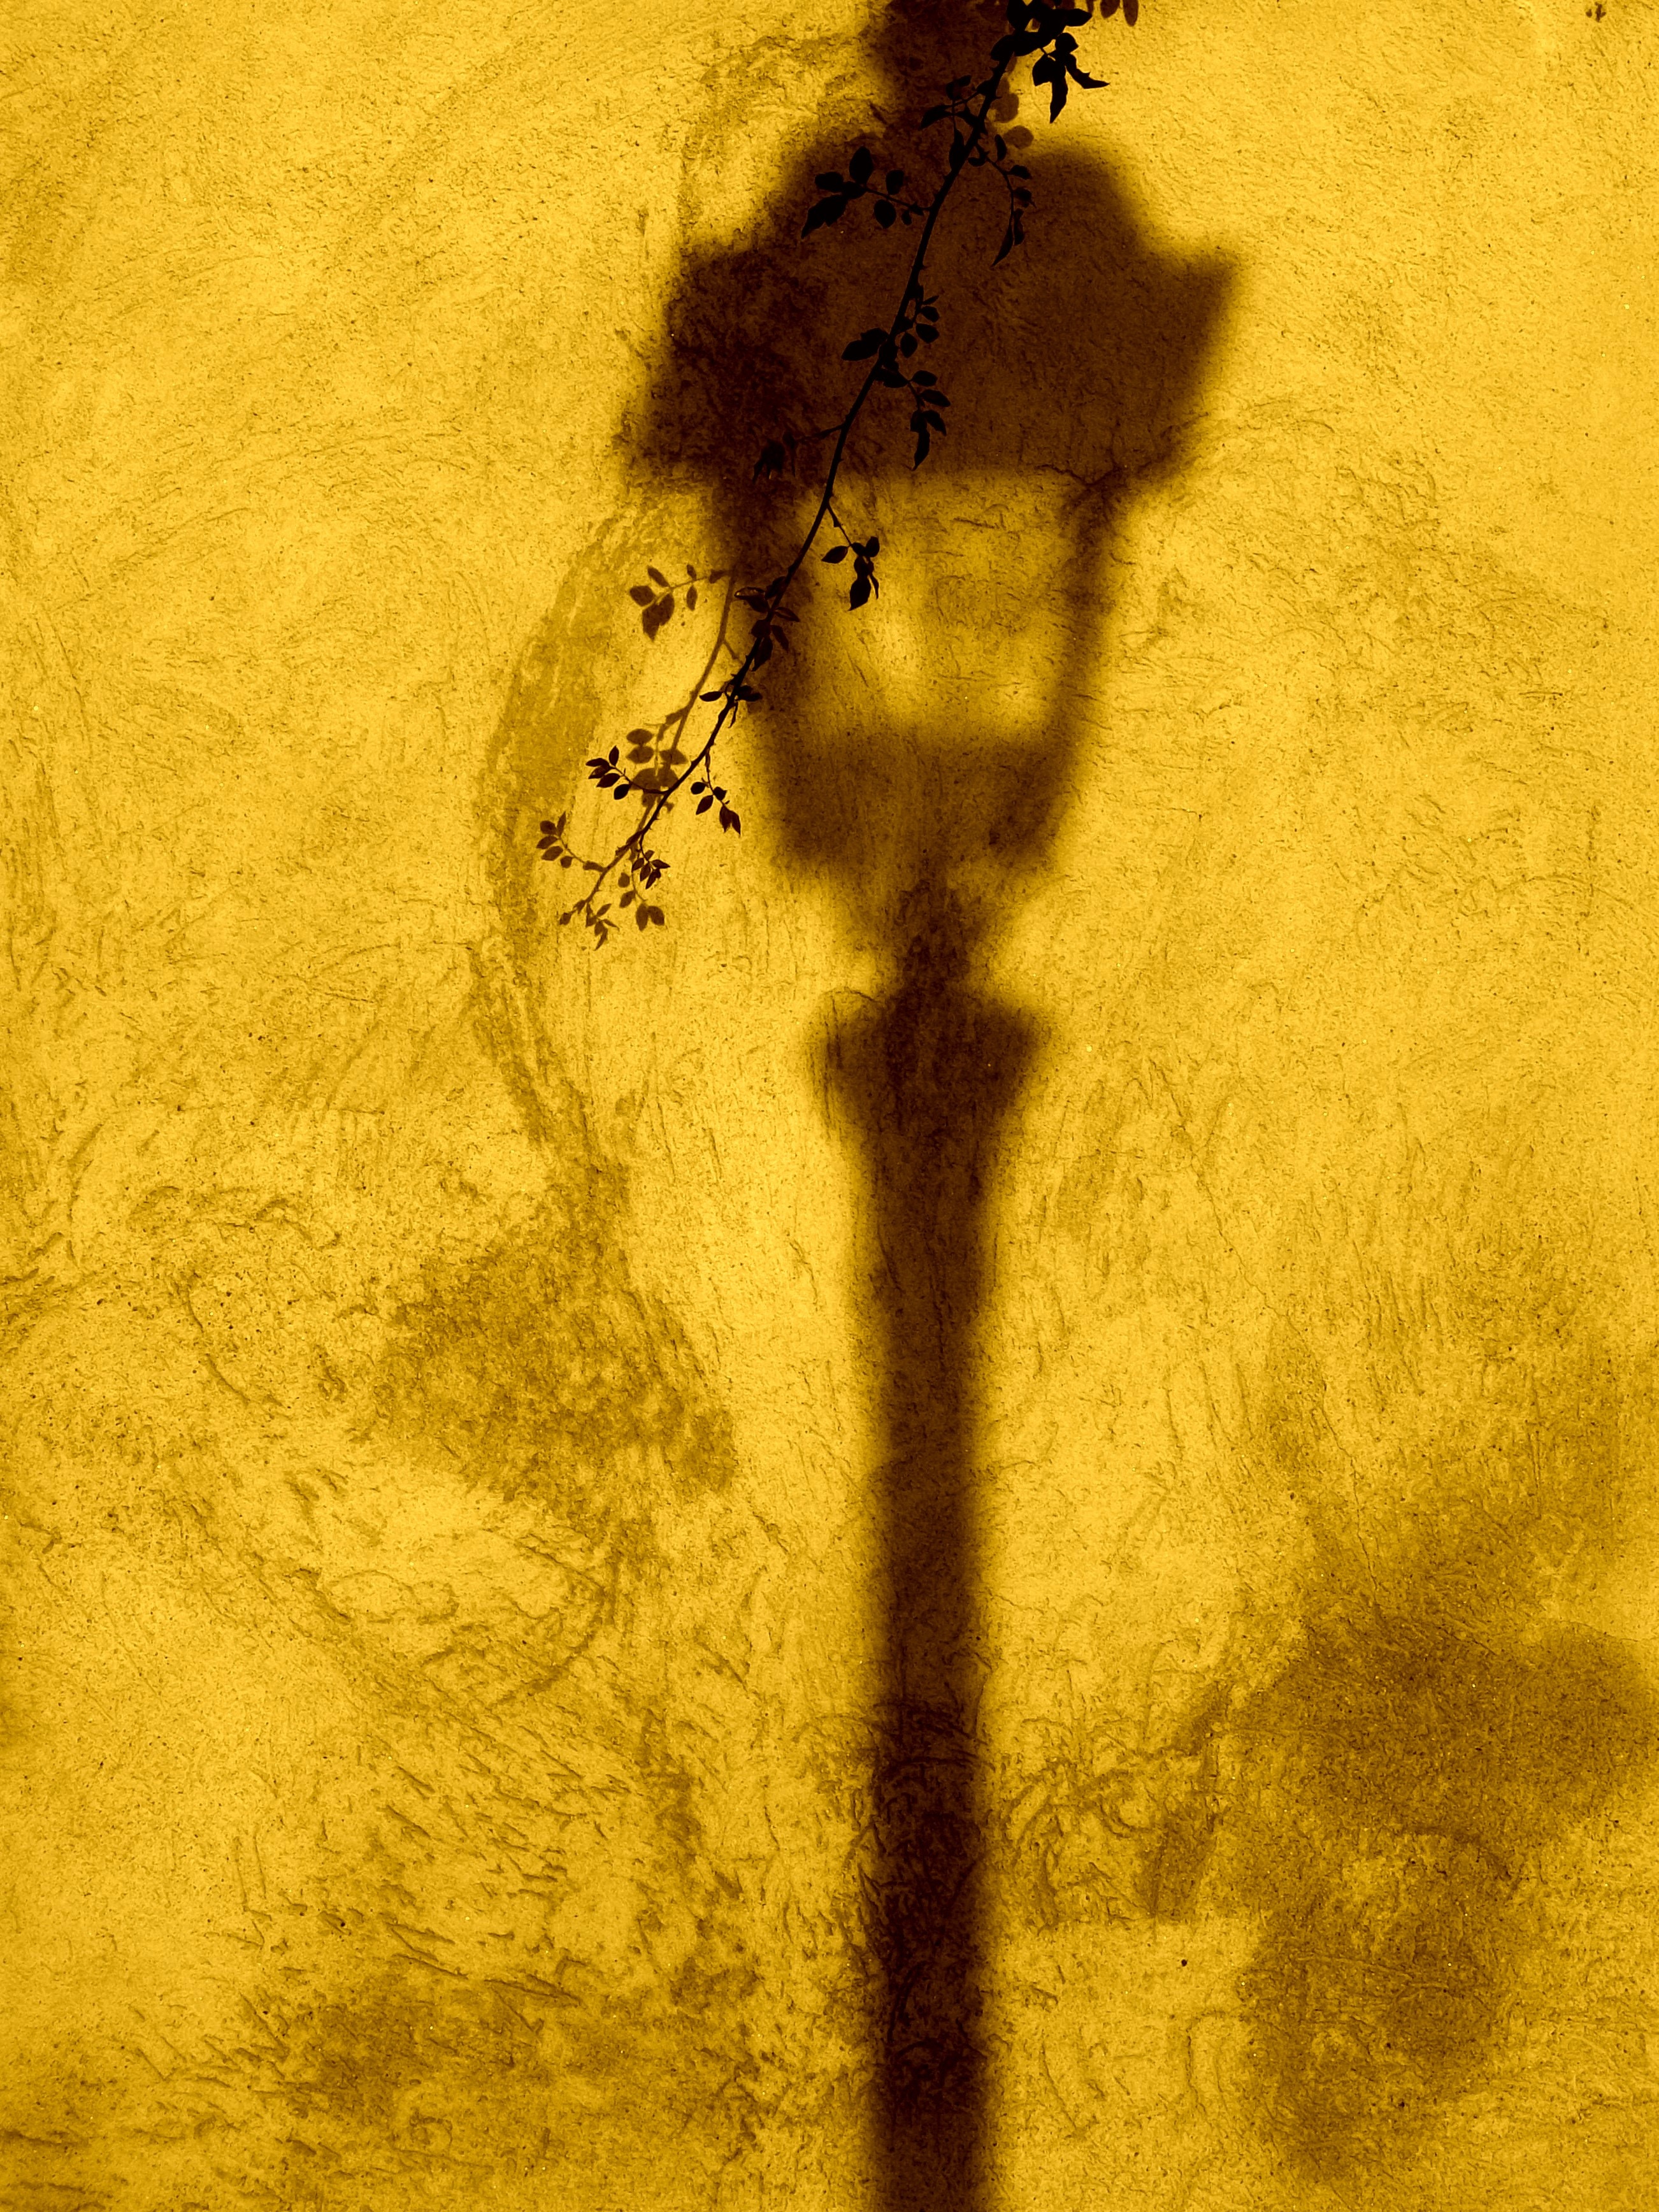 lantern, lamp, yellow, texture, textures, branch, shadow, wall lock screen backgrounds